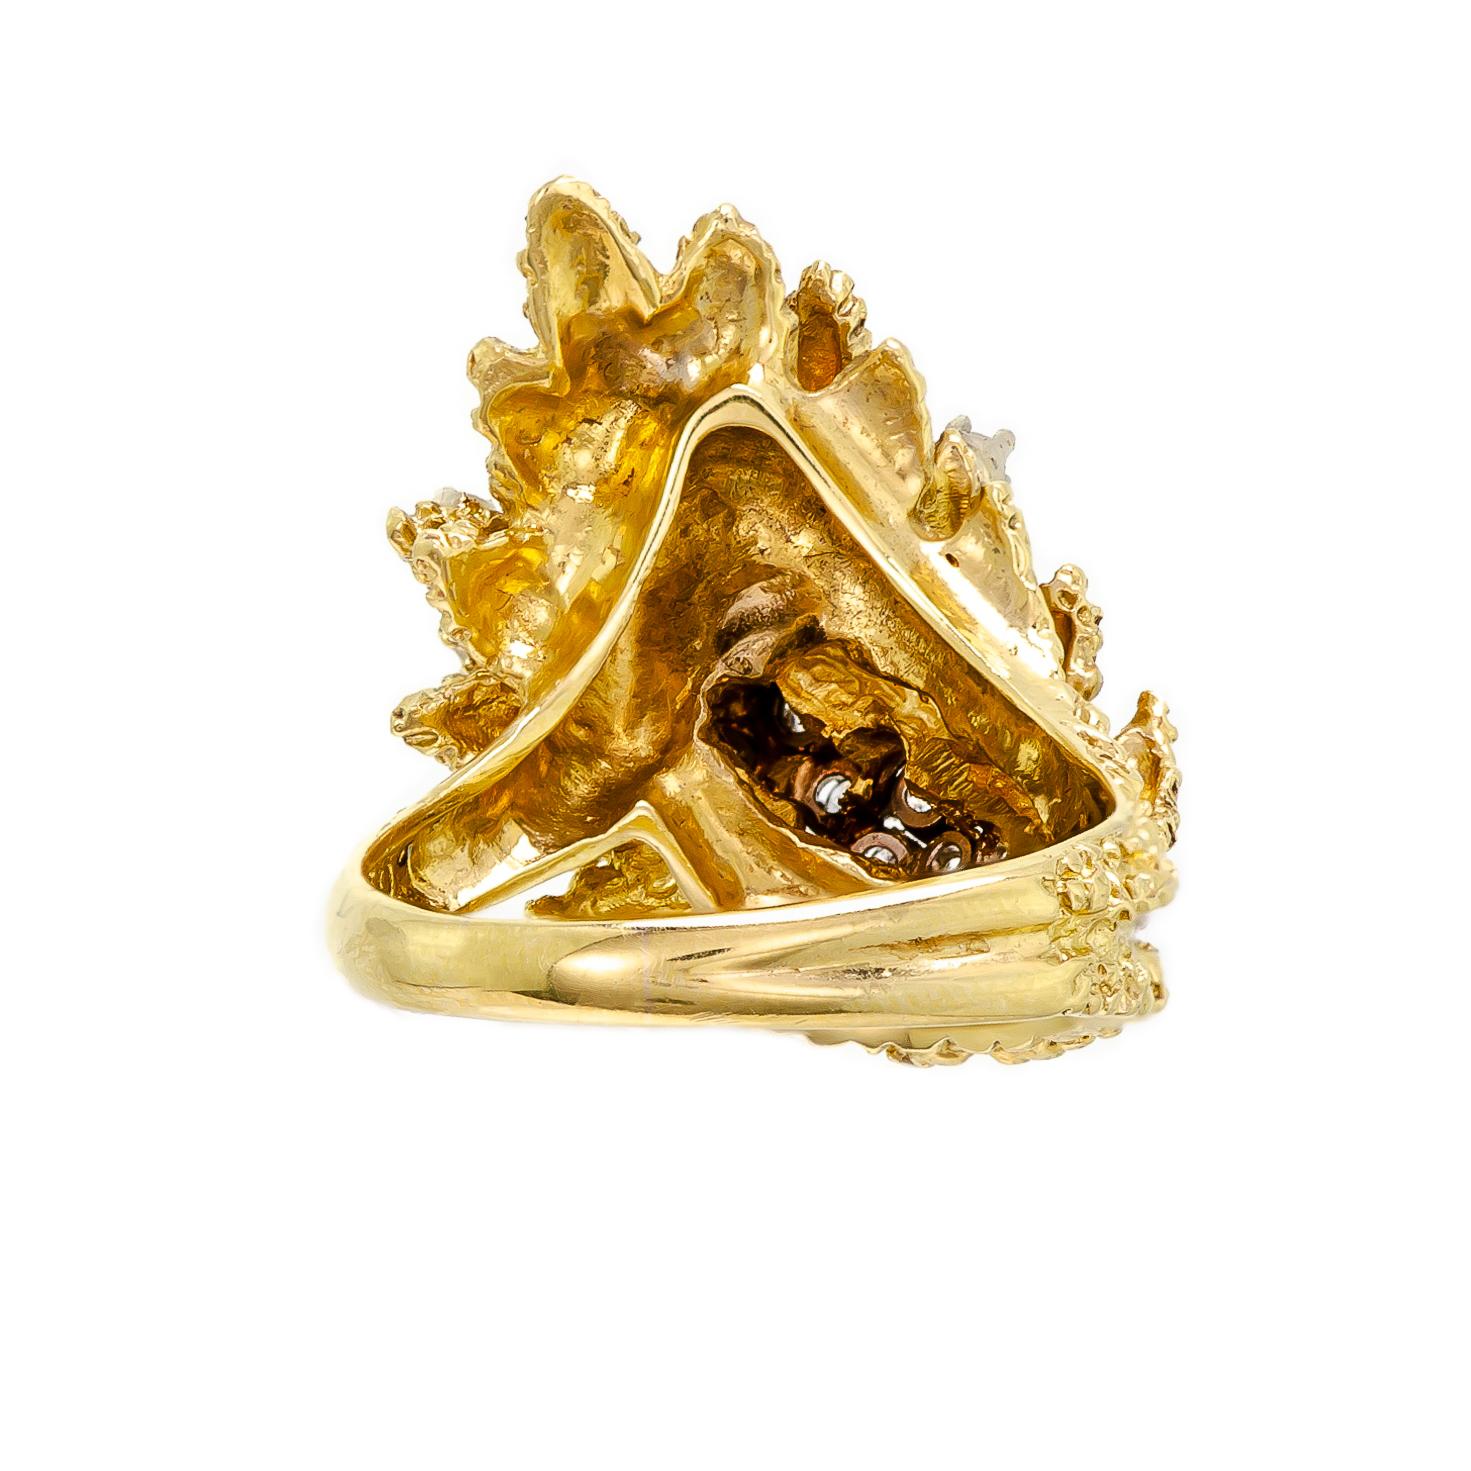 Brilliant Cut Vintage Heavy Circa 1960 18k Yellow Gold Diamond Abstract Ring For Sale